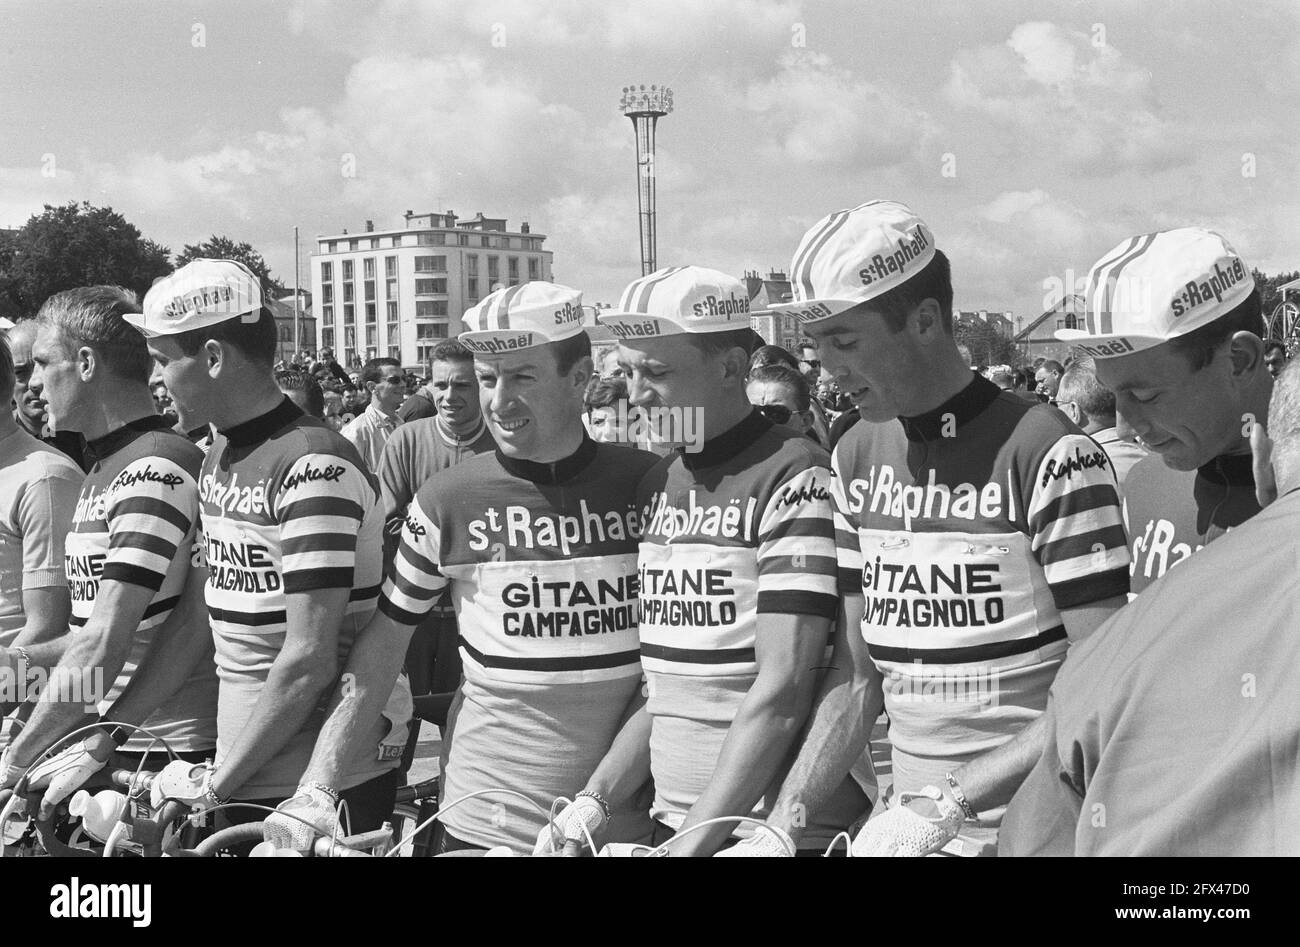 The St. Raphael-Gitanes team - The St. Raphael-Gitanes team, The Netherlands, 20th century press agency photo, news to remember, documentary, historic photography 1945-1990, visual stories, human history of the Twentieth Century, capturing moments in time Stock Photo